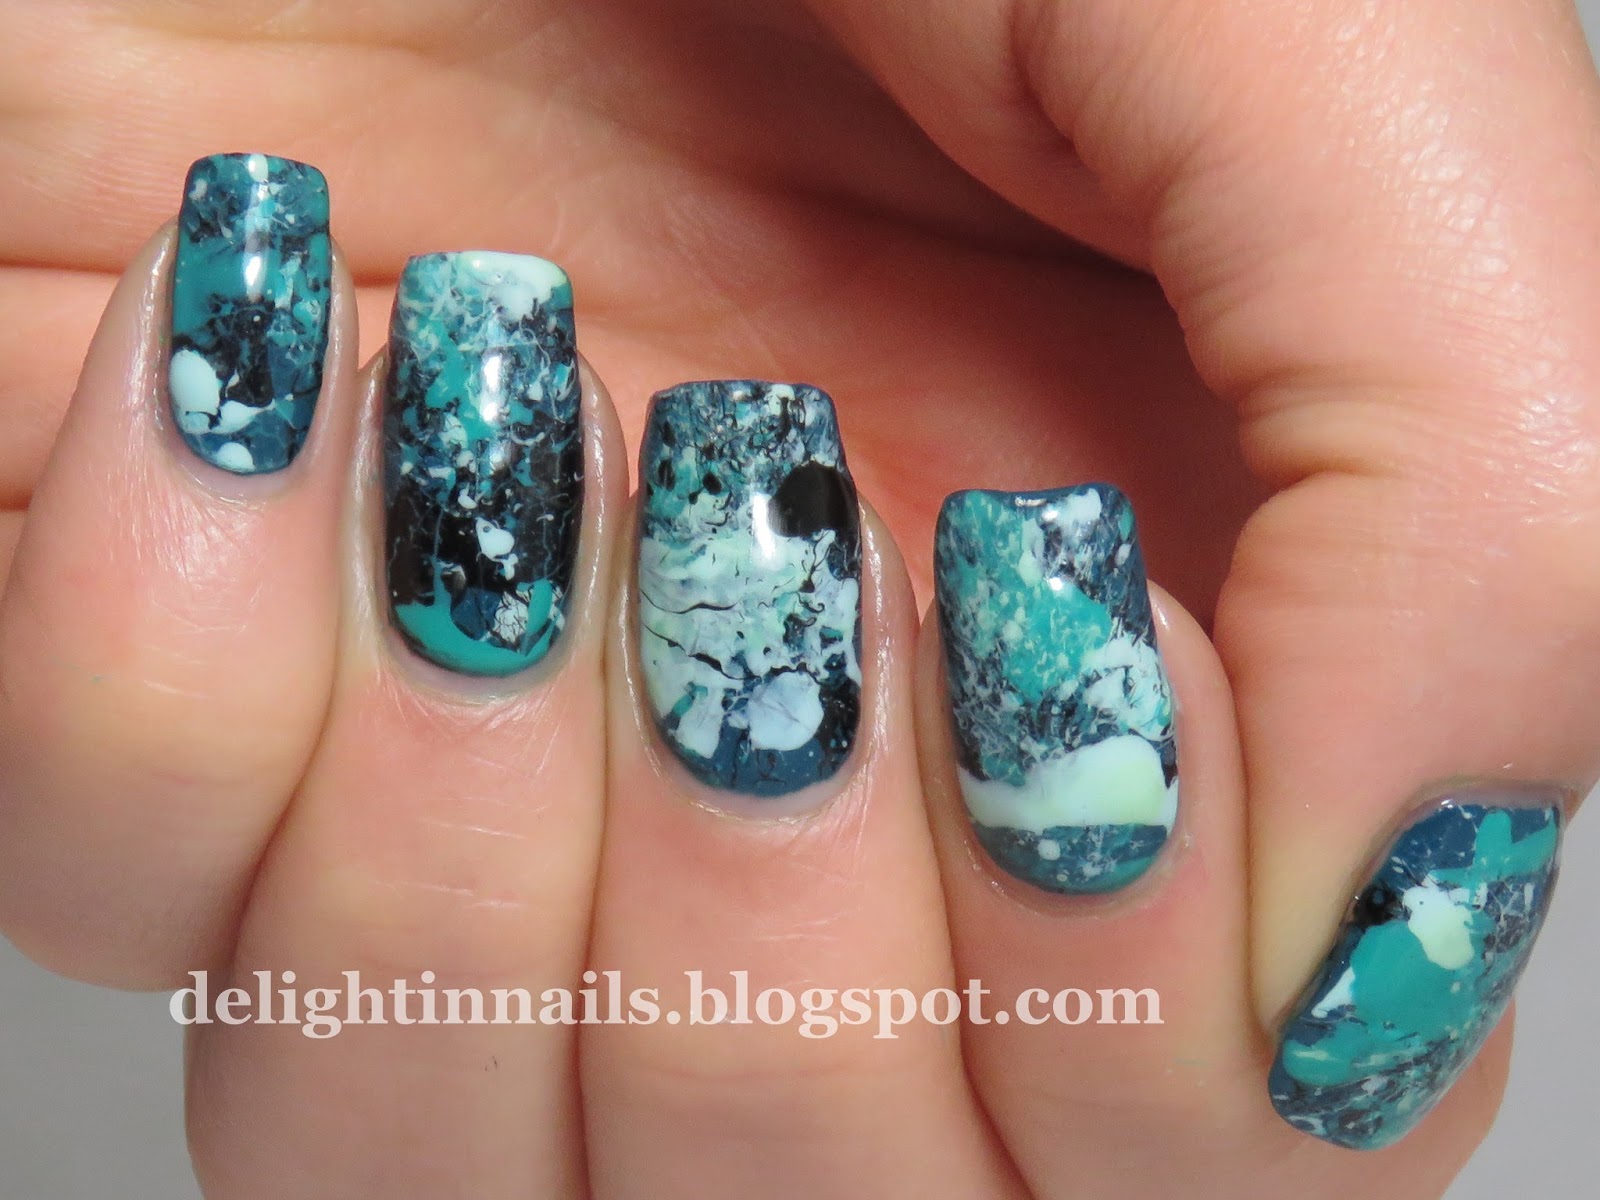 Delight In Nails: 40 Great Nail Art Ideas - Teal